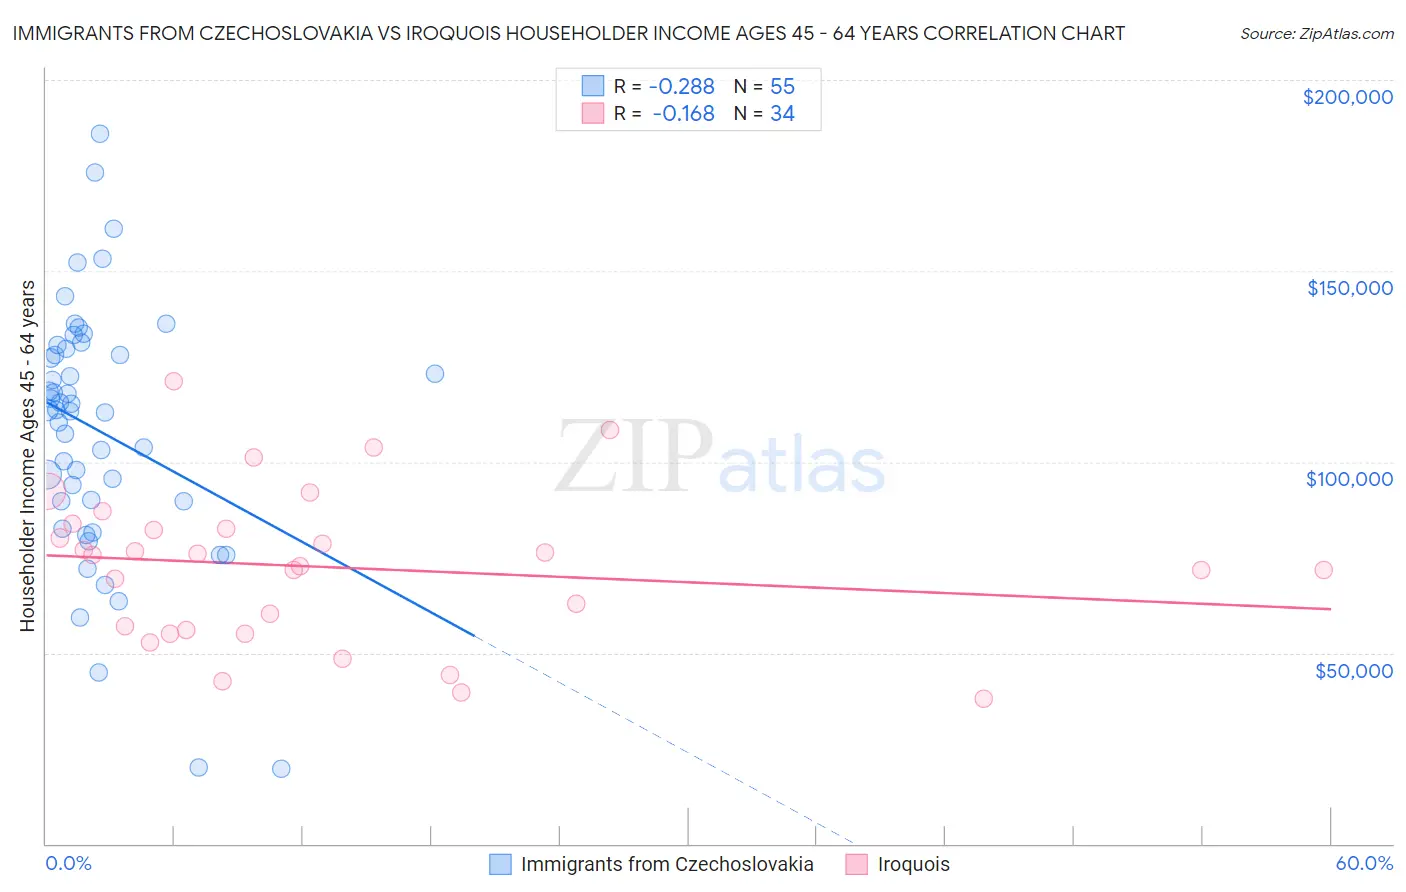 Immigrants from Czechoslovakia vs Iroquois Householder Income Ages 45 - 64 years